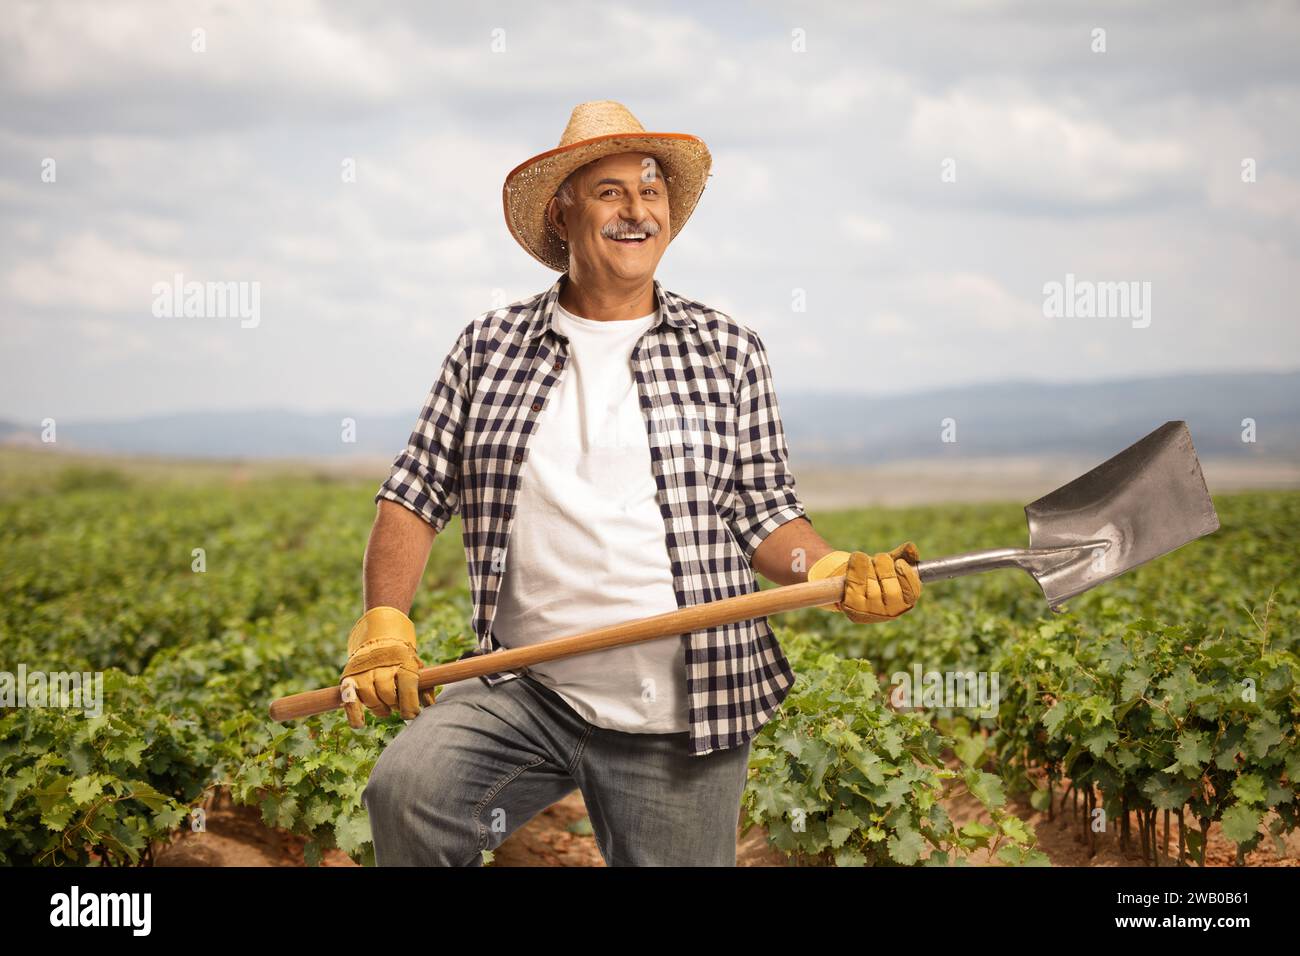 Grape farmer with a straw hat holding a shovel on a field Stock Photo